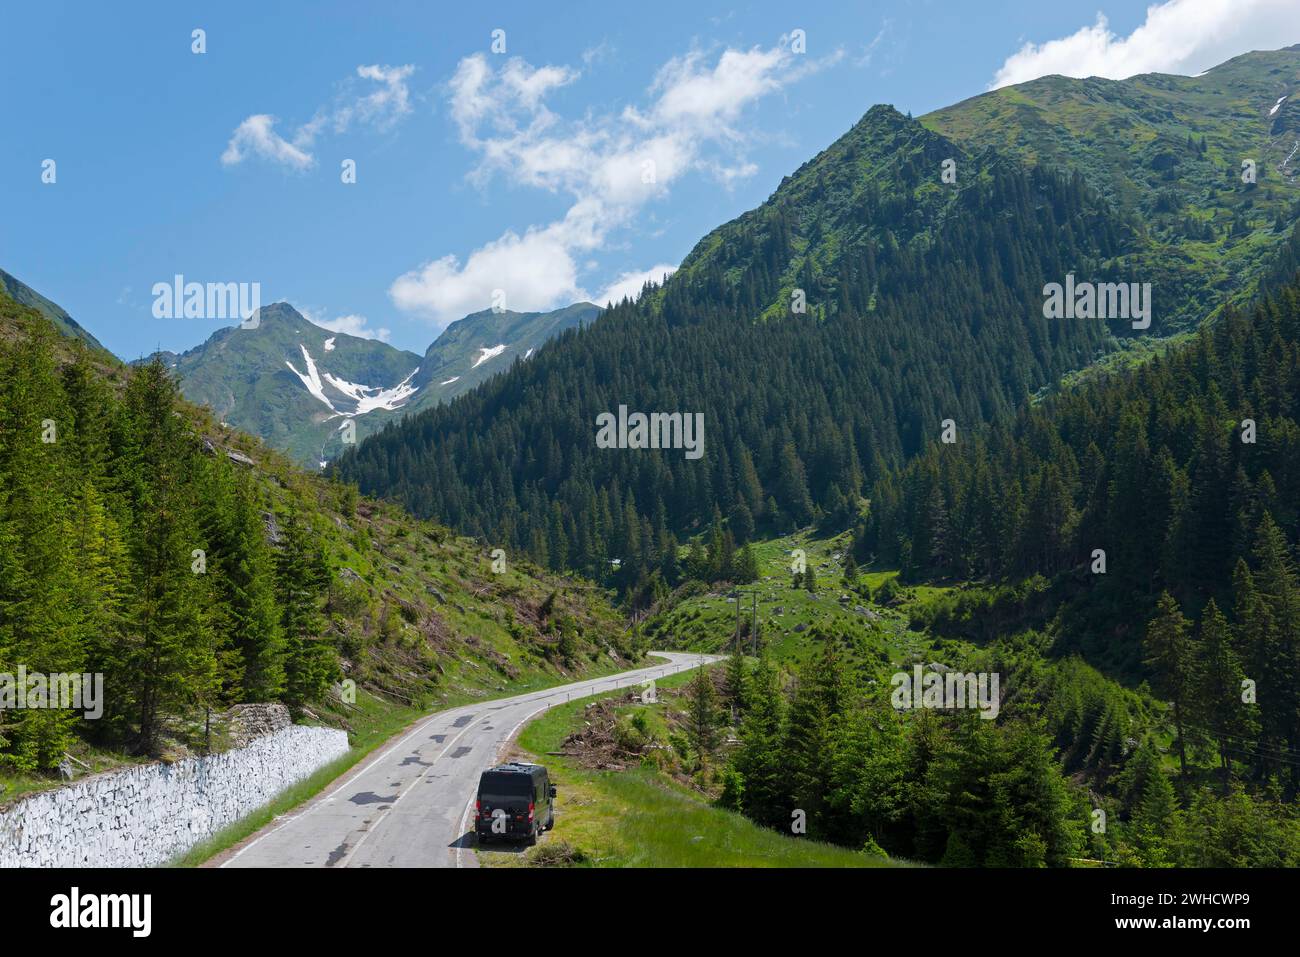 Road leading through a picturesque mountain landscape with lush greenery and clear blue skies, Mountain Road, Transfogarasan High Road Stock Photo